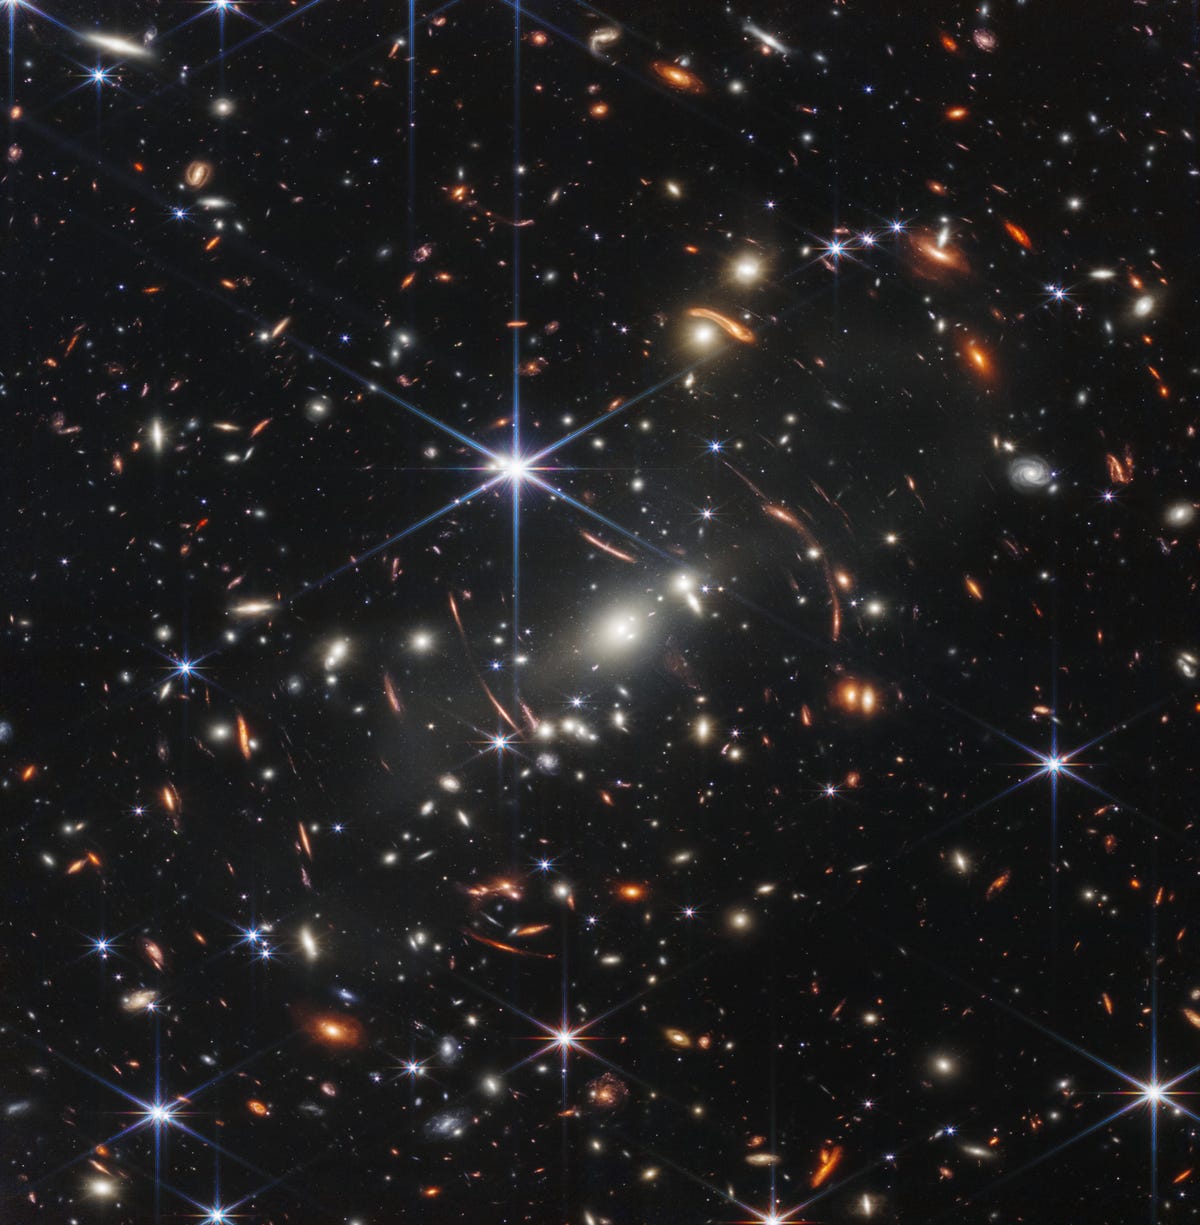 A field of thousands of galaxies against the dark of space with a large central six-pointed blue star.